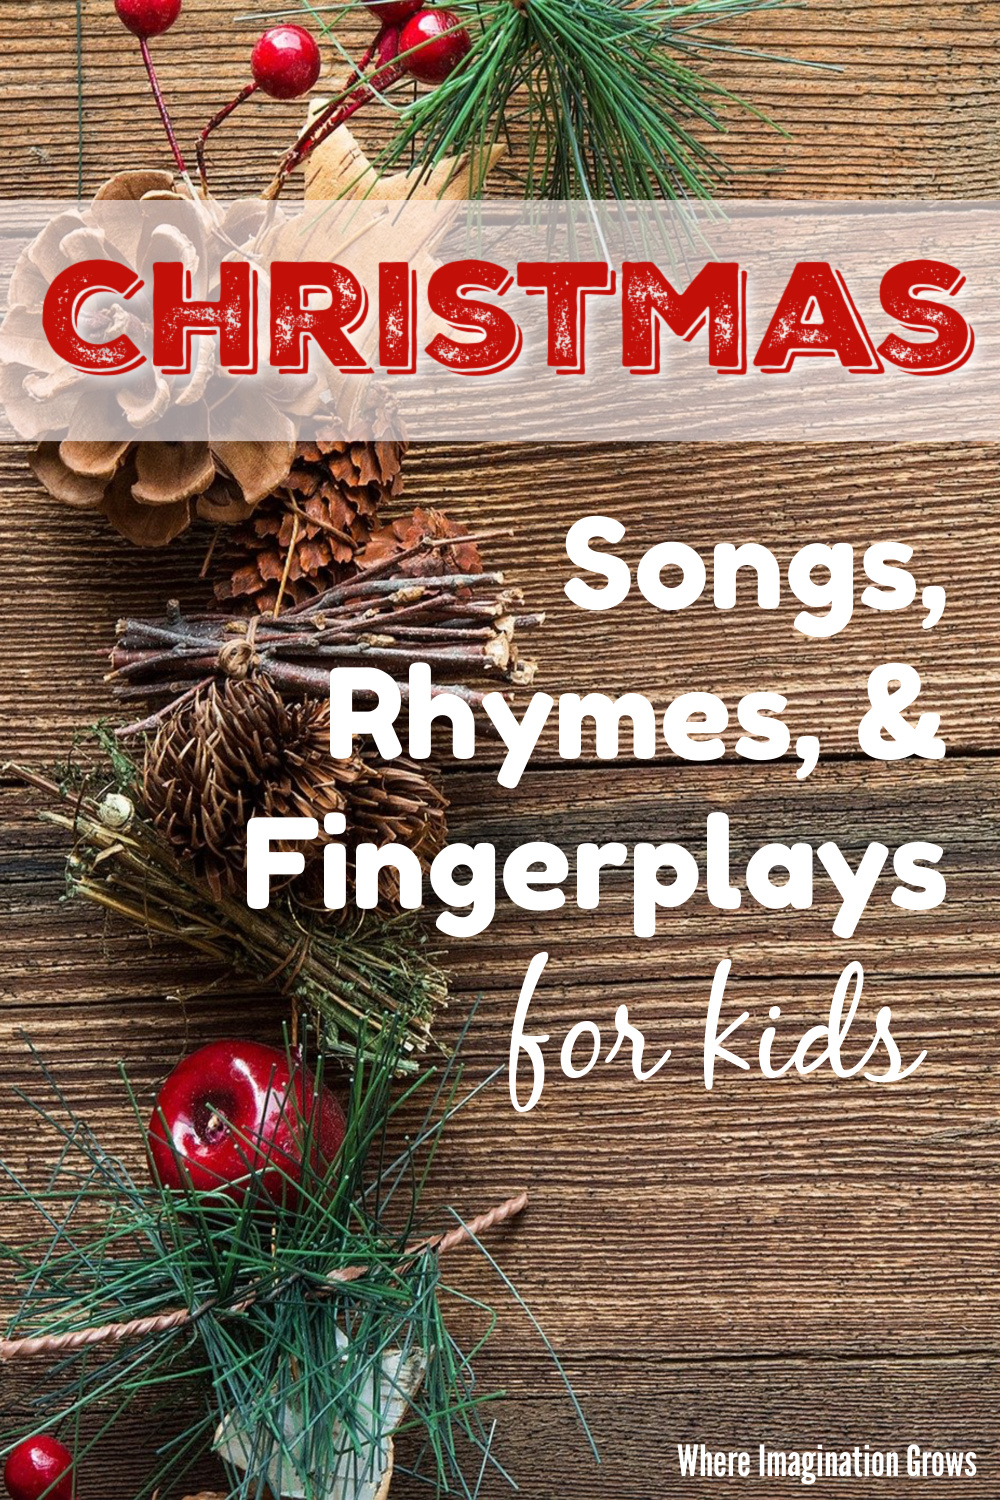 Decorative image of garland on wooden table with text "Christmas songs, rhymes, and fingerplays for kids"